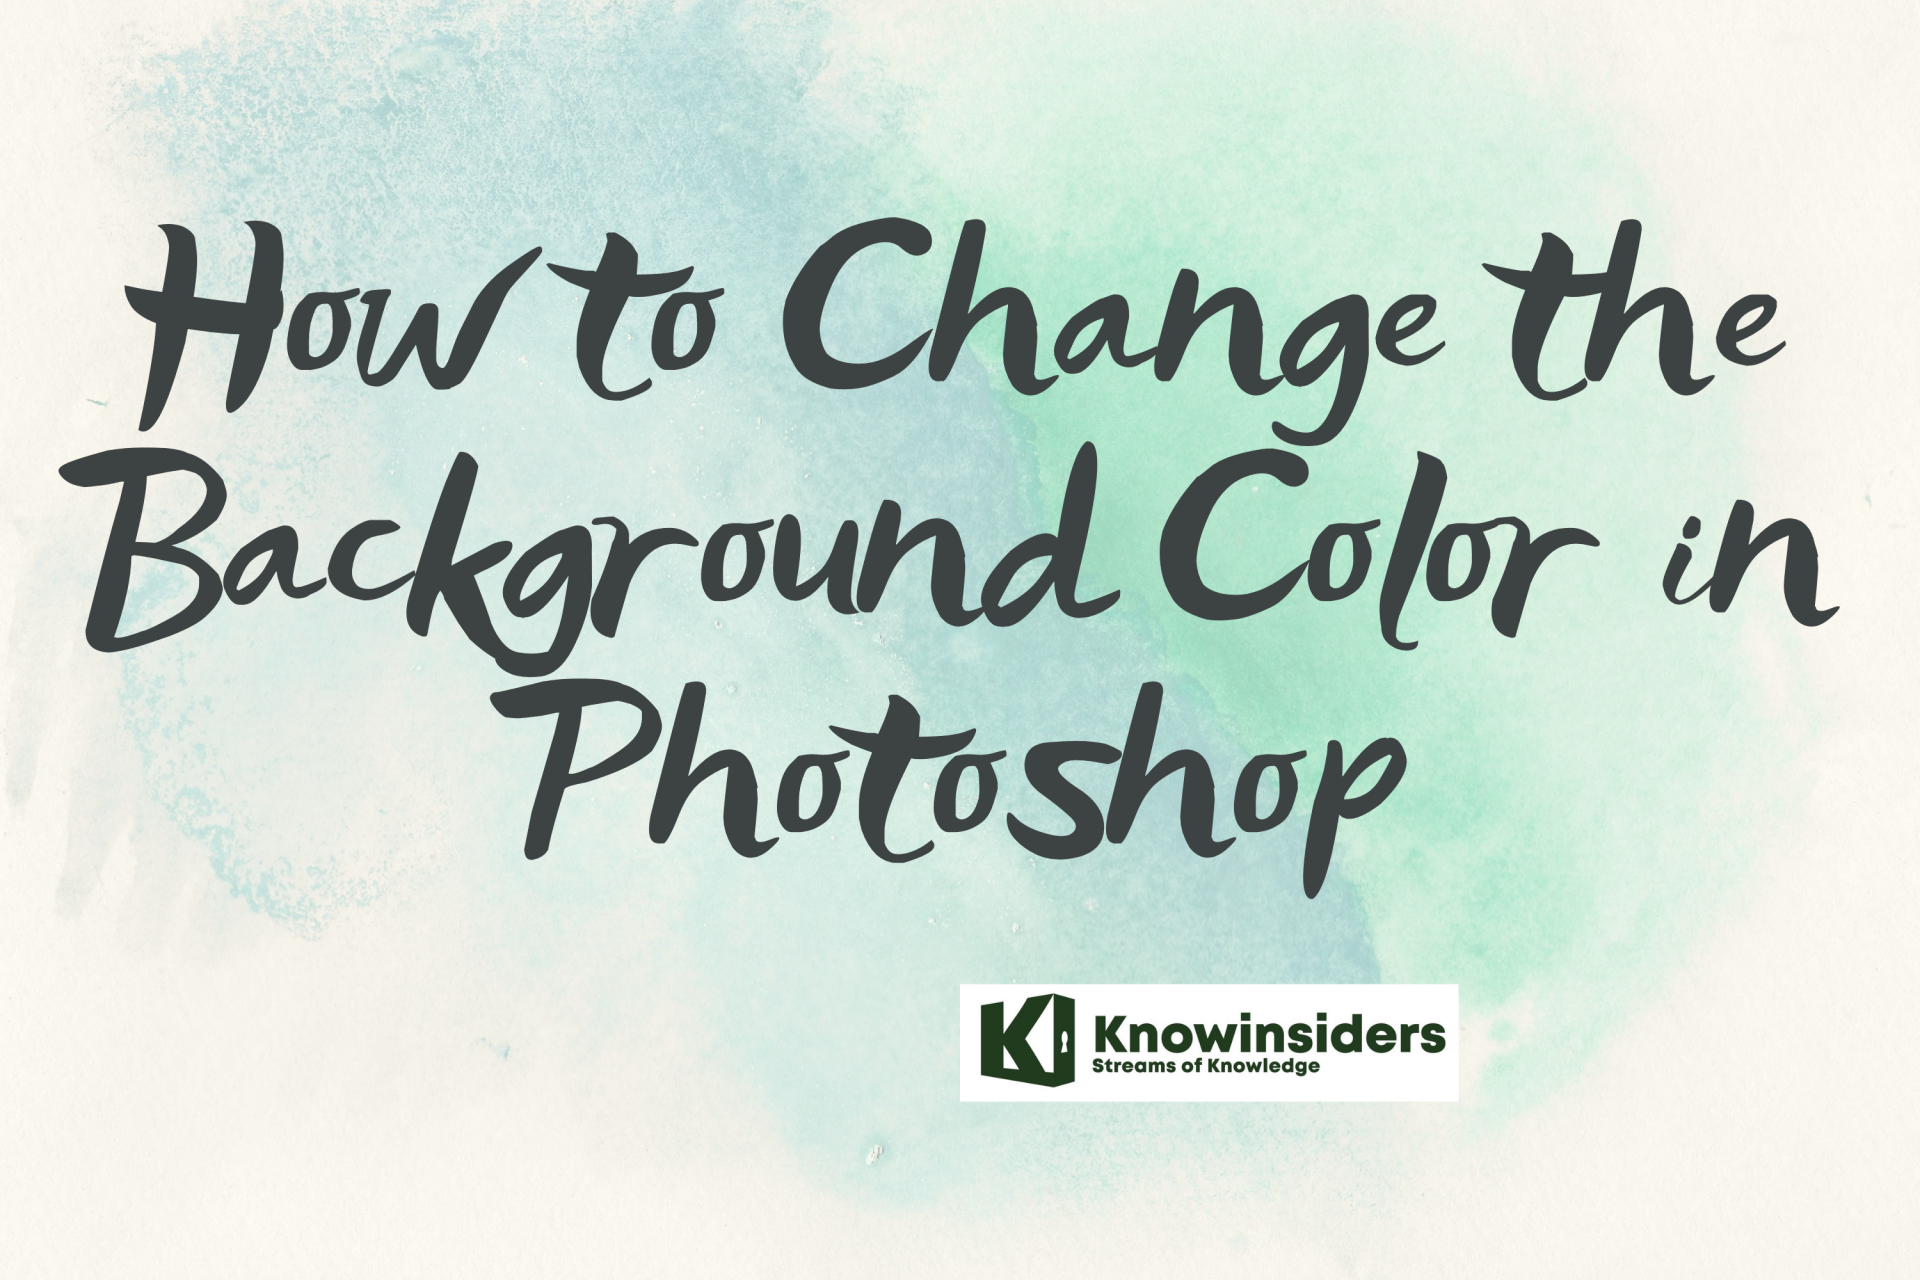 How to Change the Background Color in Photoshop